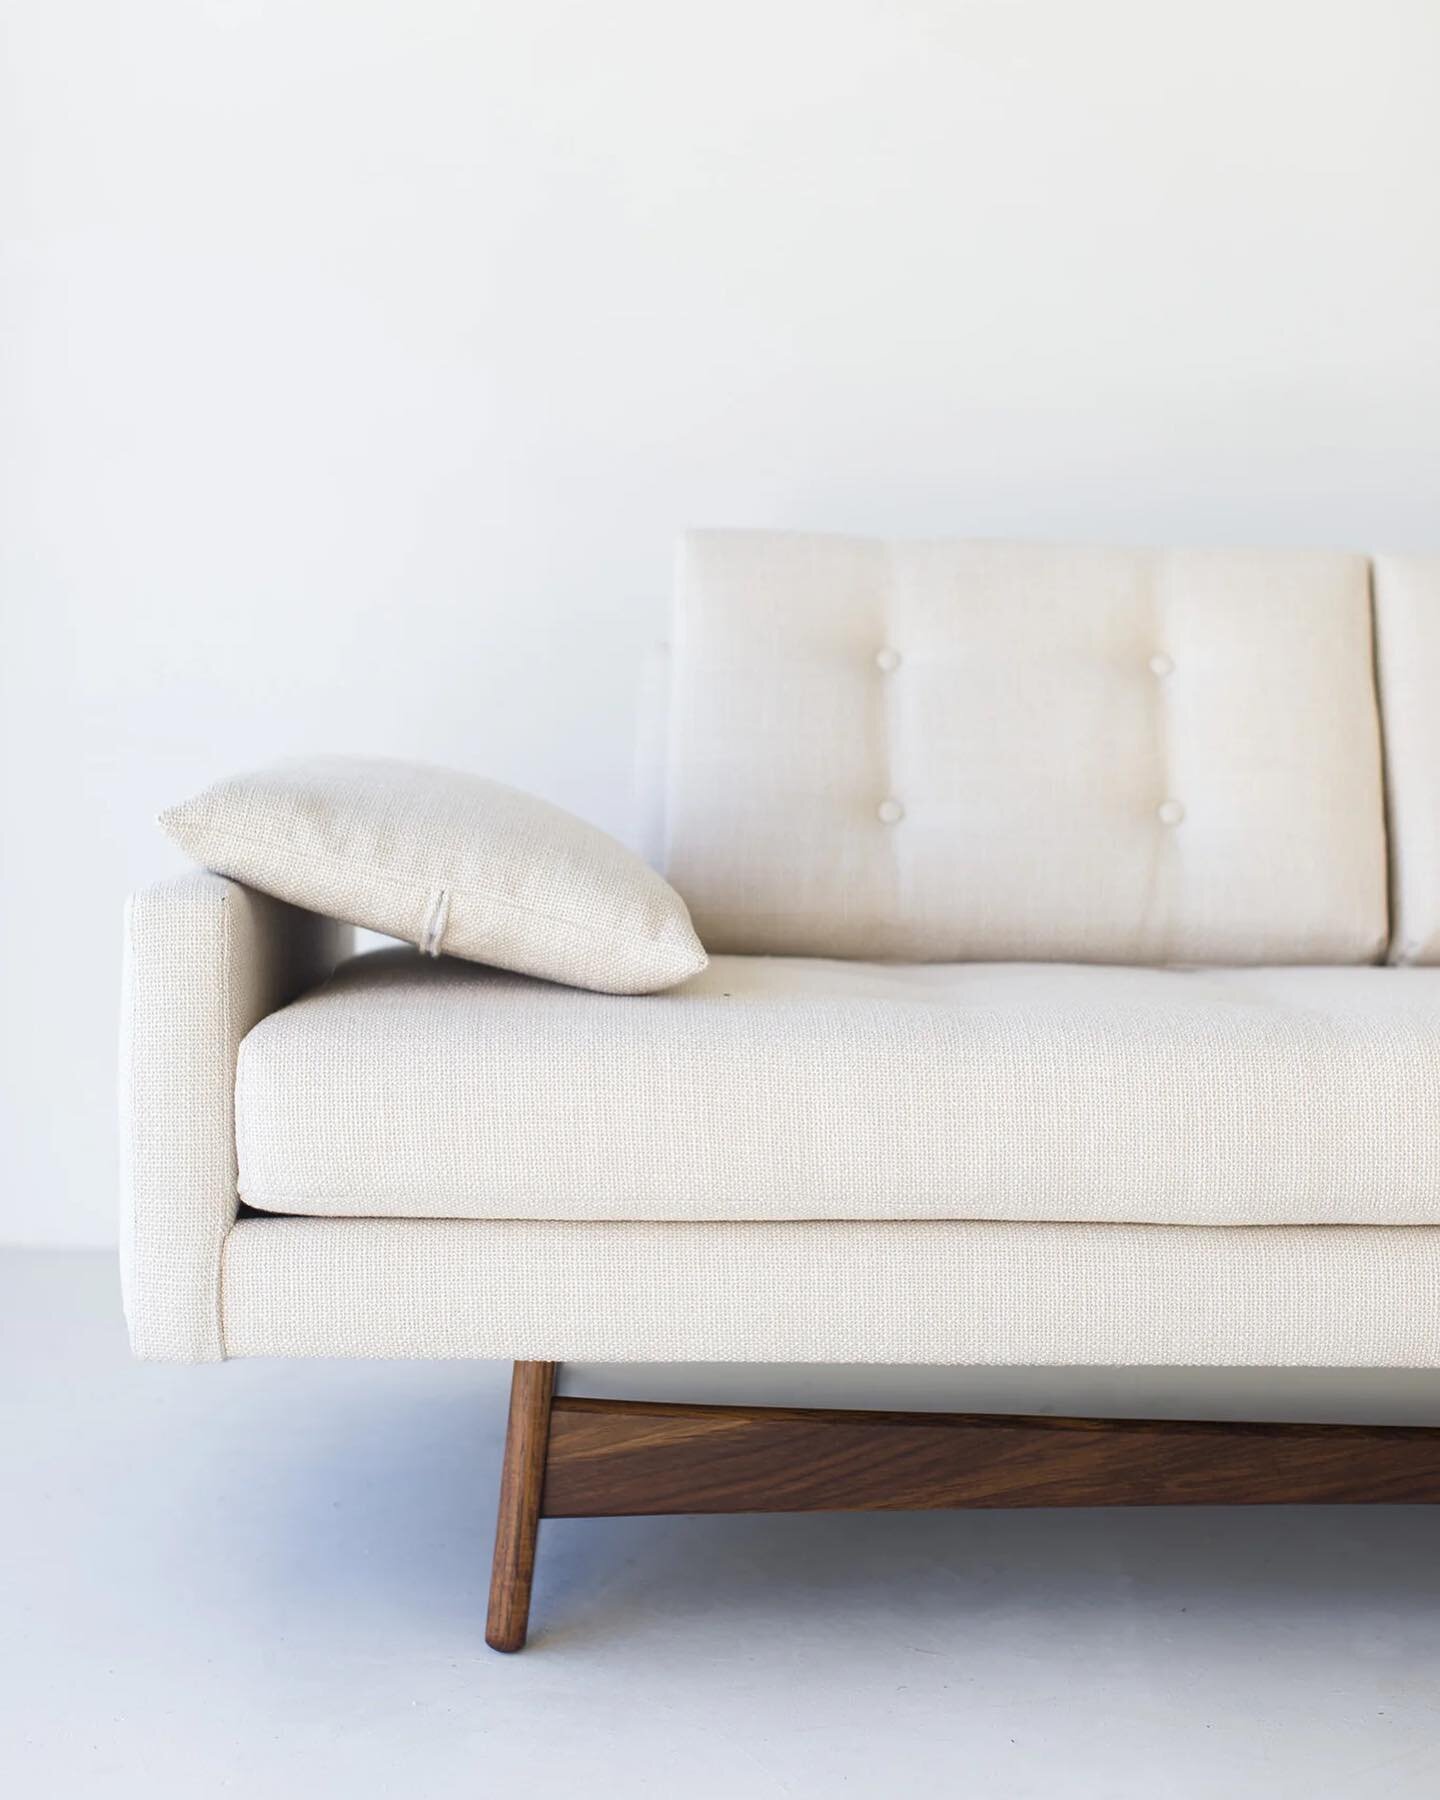 Current Obsession: Adrian Pearsall sofas for Craft Associates. #adrianpearsall &mdash;-
Interested in our design services? DM us today!
Local to DC? Visit our boutique showroom, Casita Casual in Old Town Alexandria [Link in Profile] 
#lounge #casacas